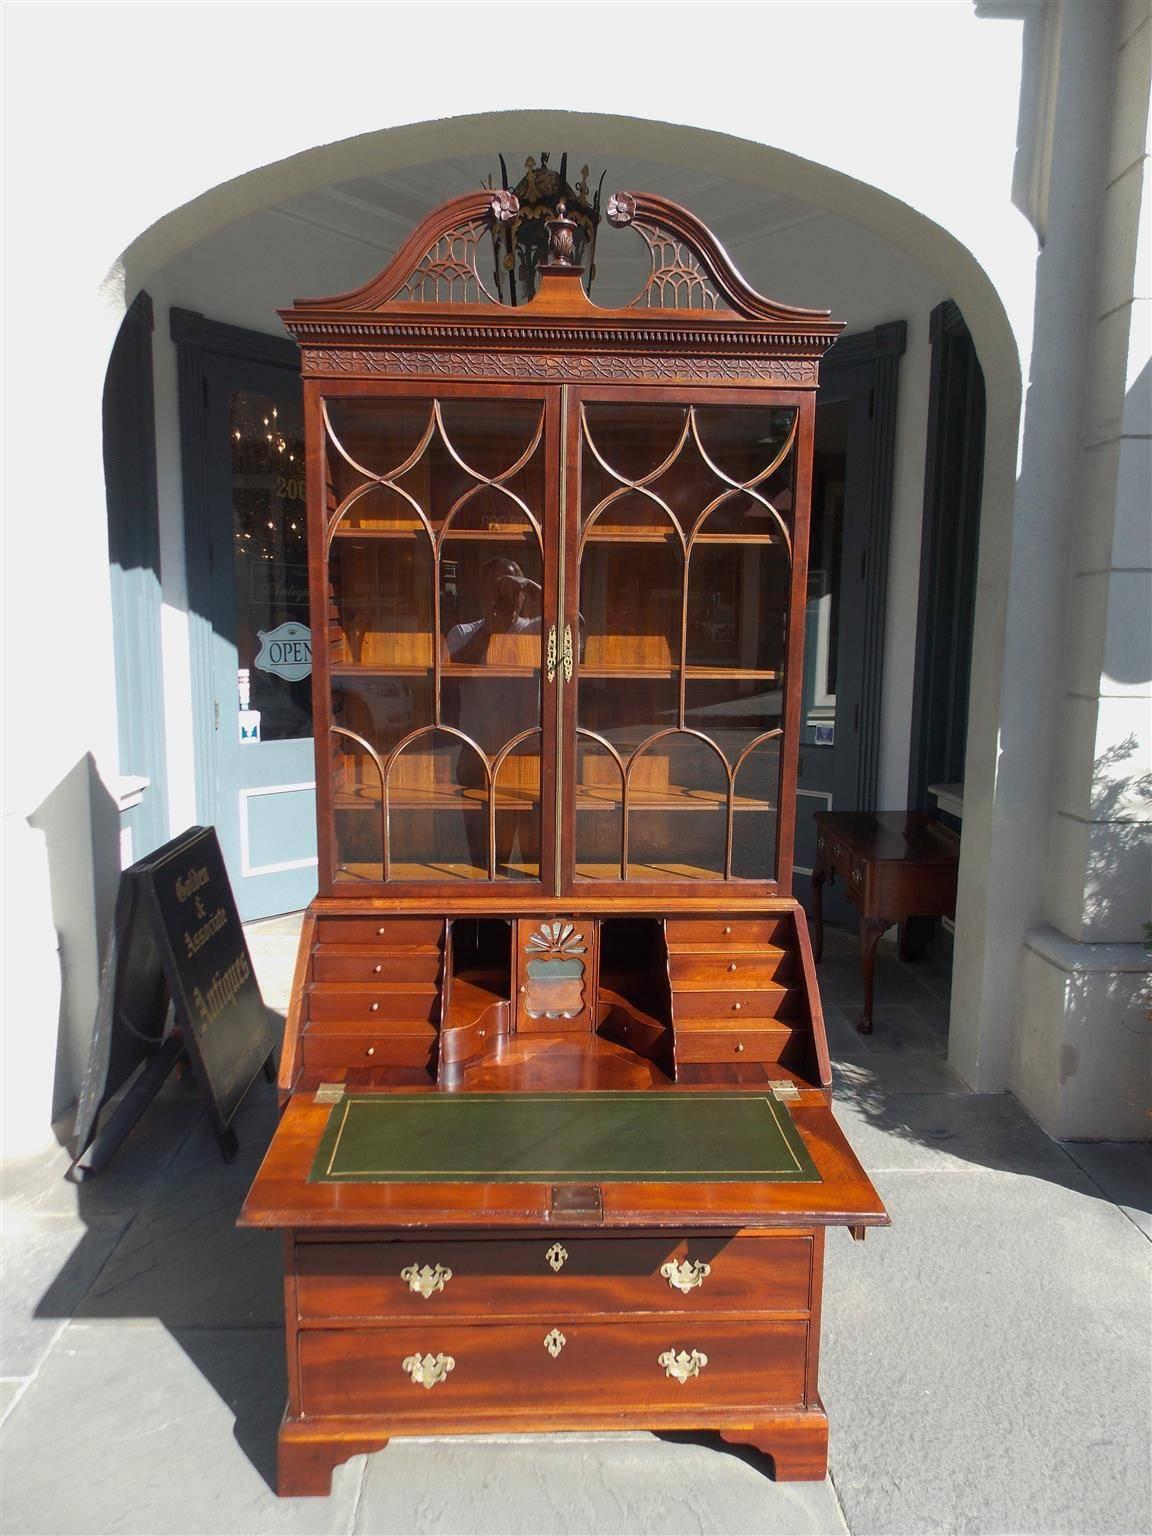 English Chippendale mahogany secretary bookcase with broken pediment cornice, intricately carved fret work and dental molding, original glass doors with adjustable shelving, step down fitted interior, graduated lower case drawers, and terminating on